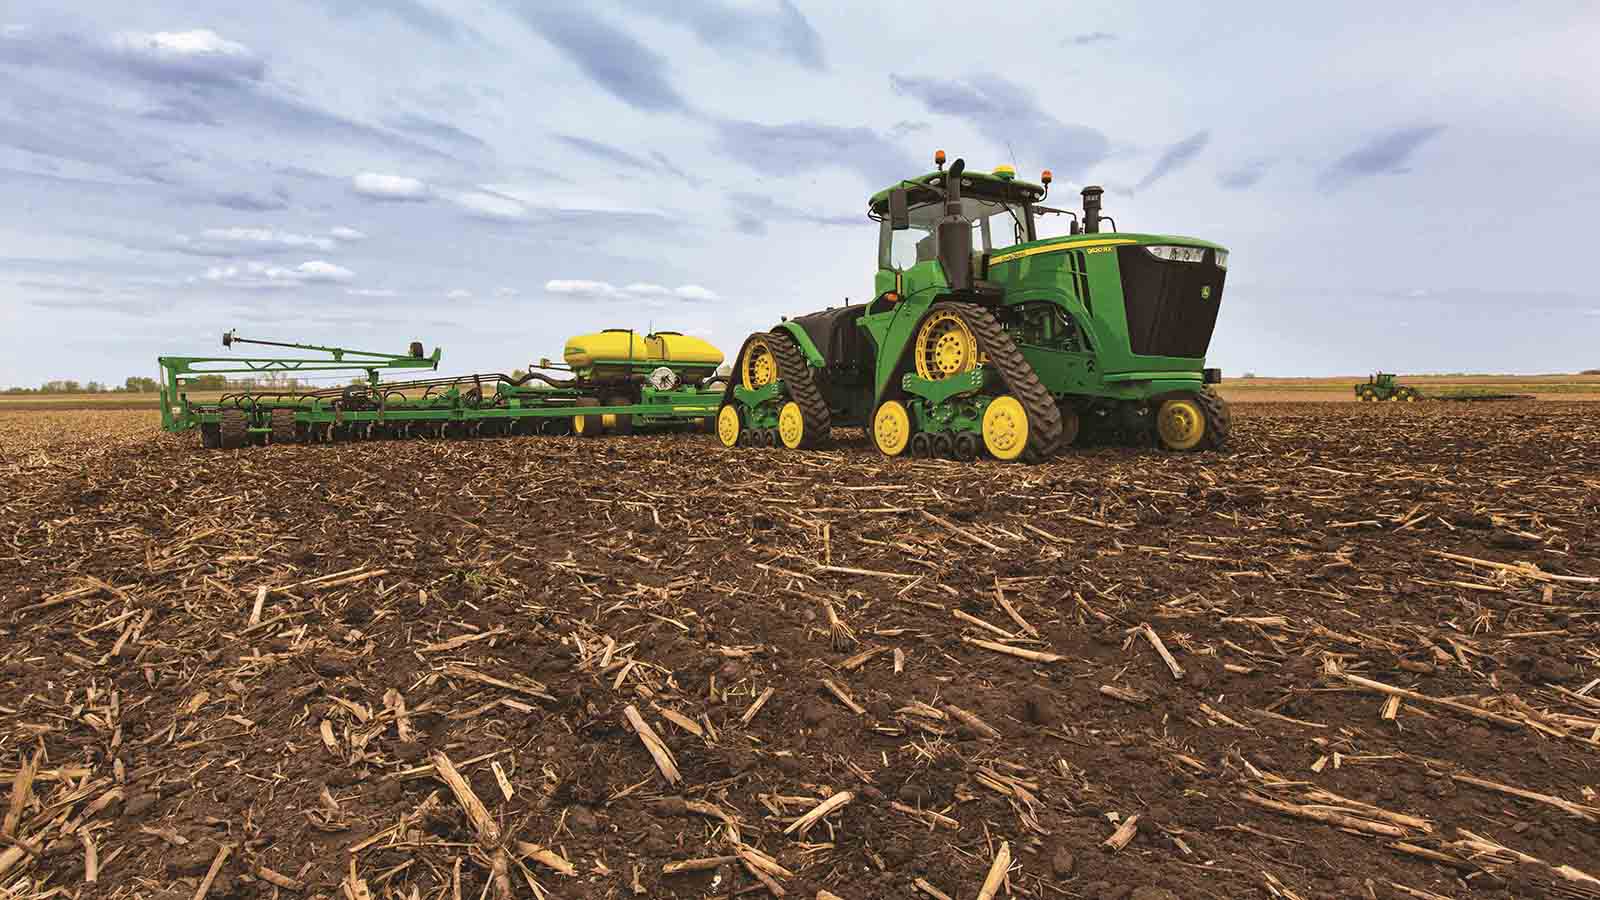 Introducing The New John Deere 9RX Narrow Tractor Series